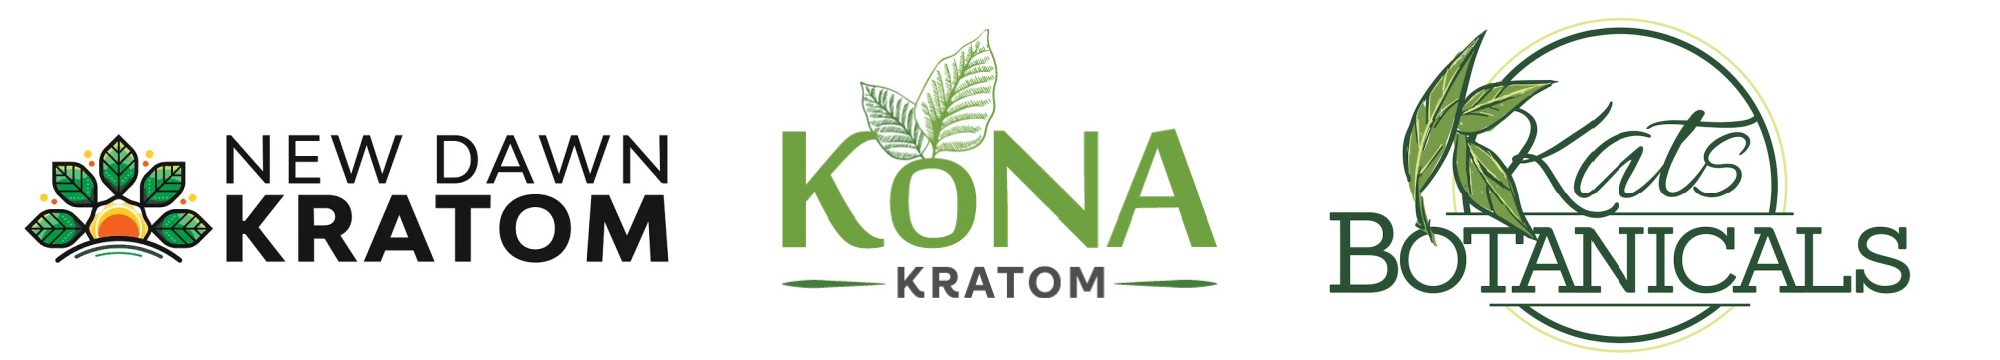 image of online stores known for quality kratom